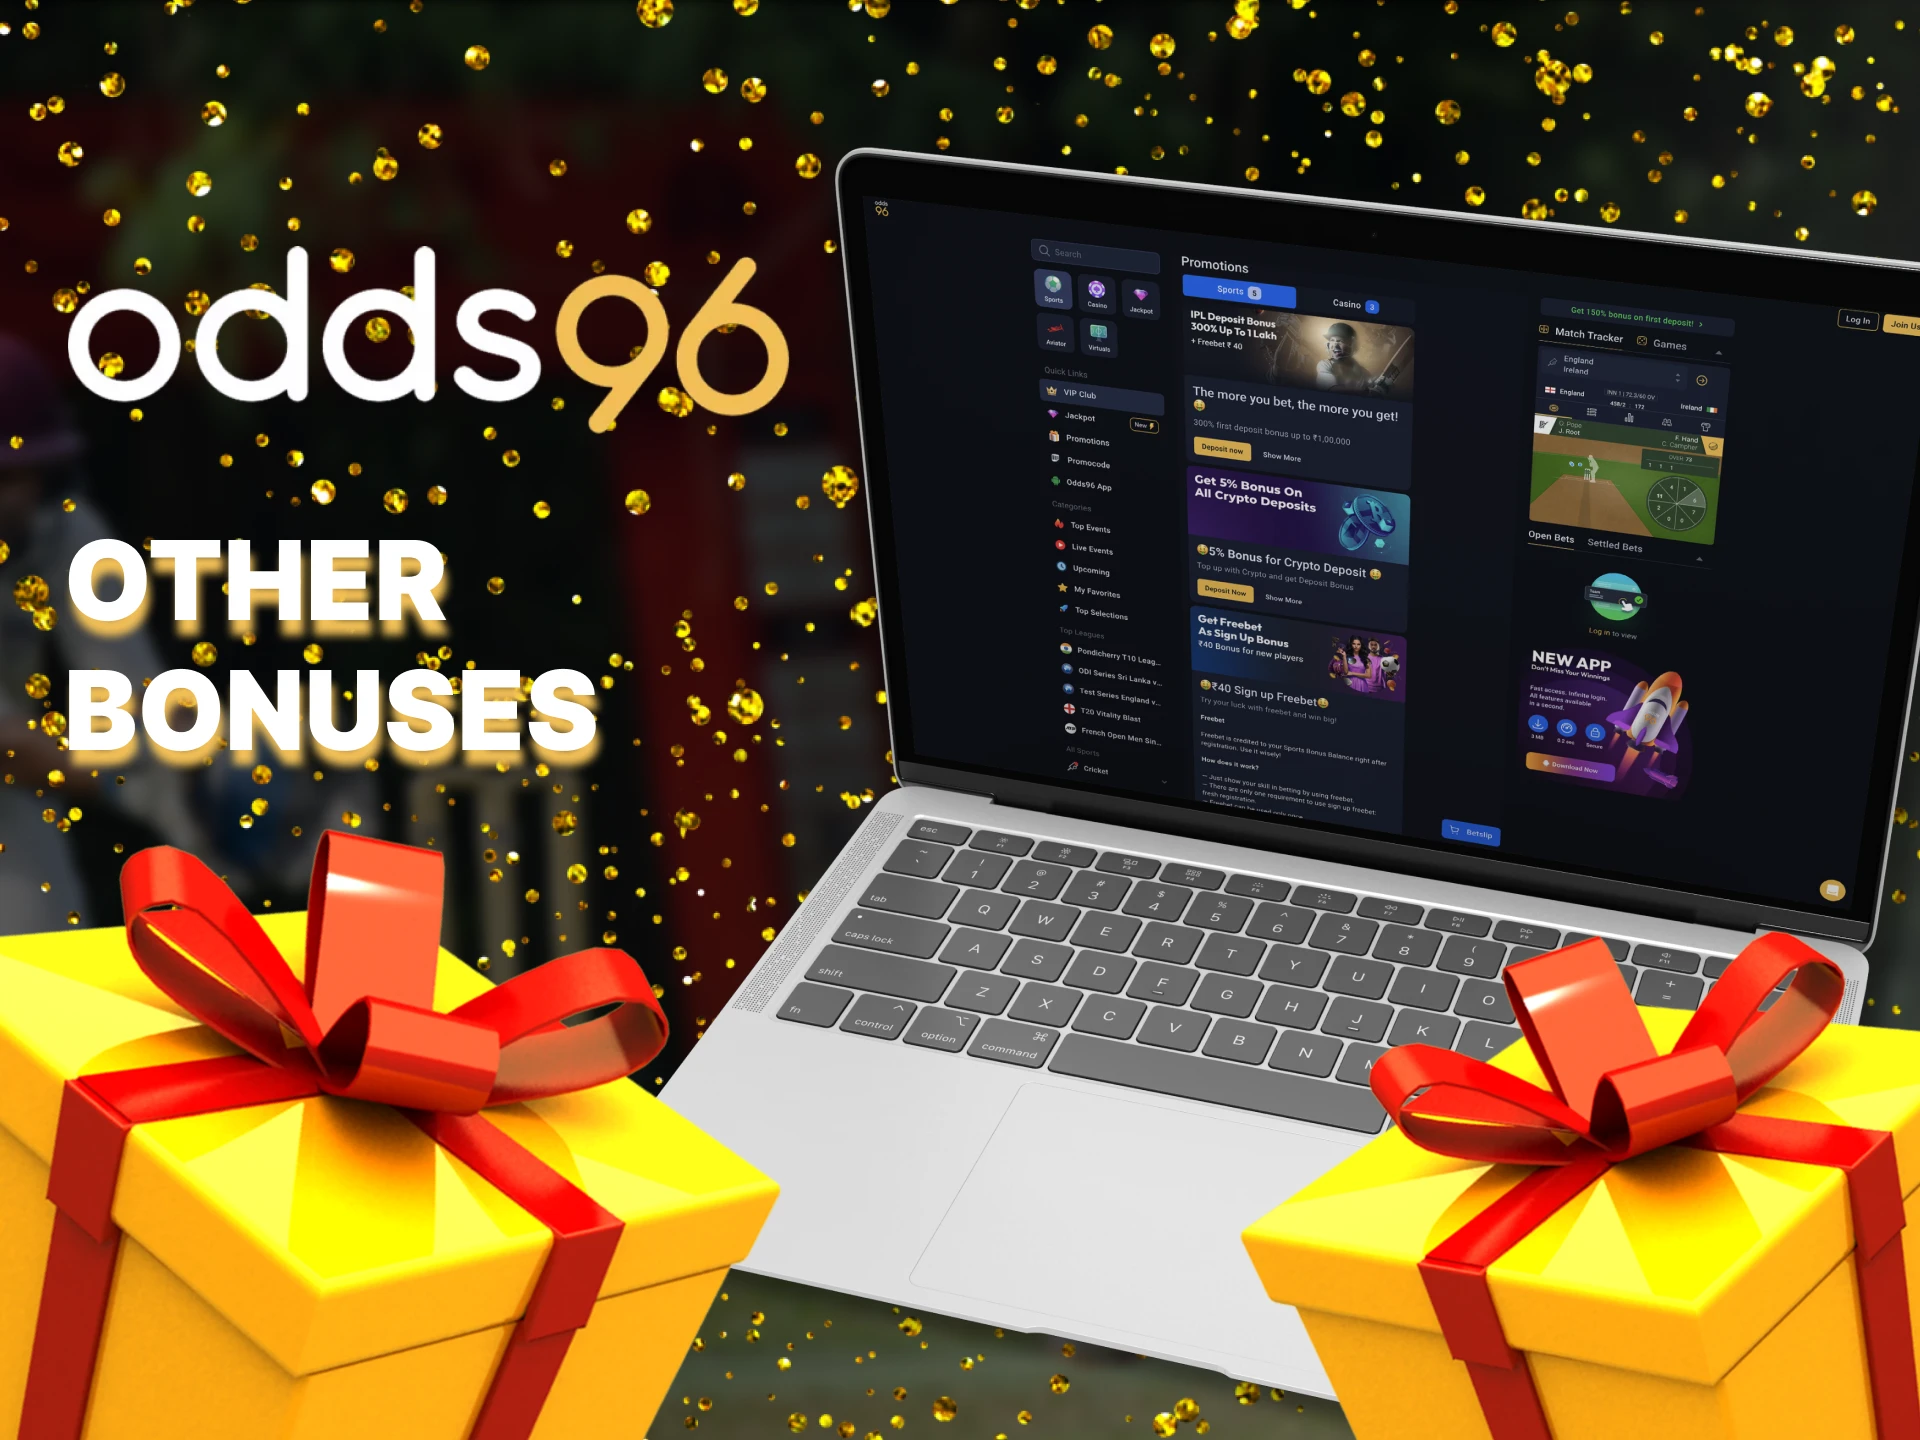 Learn more about other Odds96 bonuses.